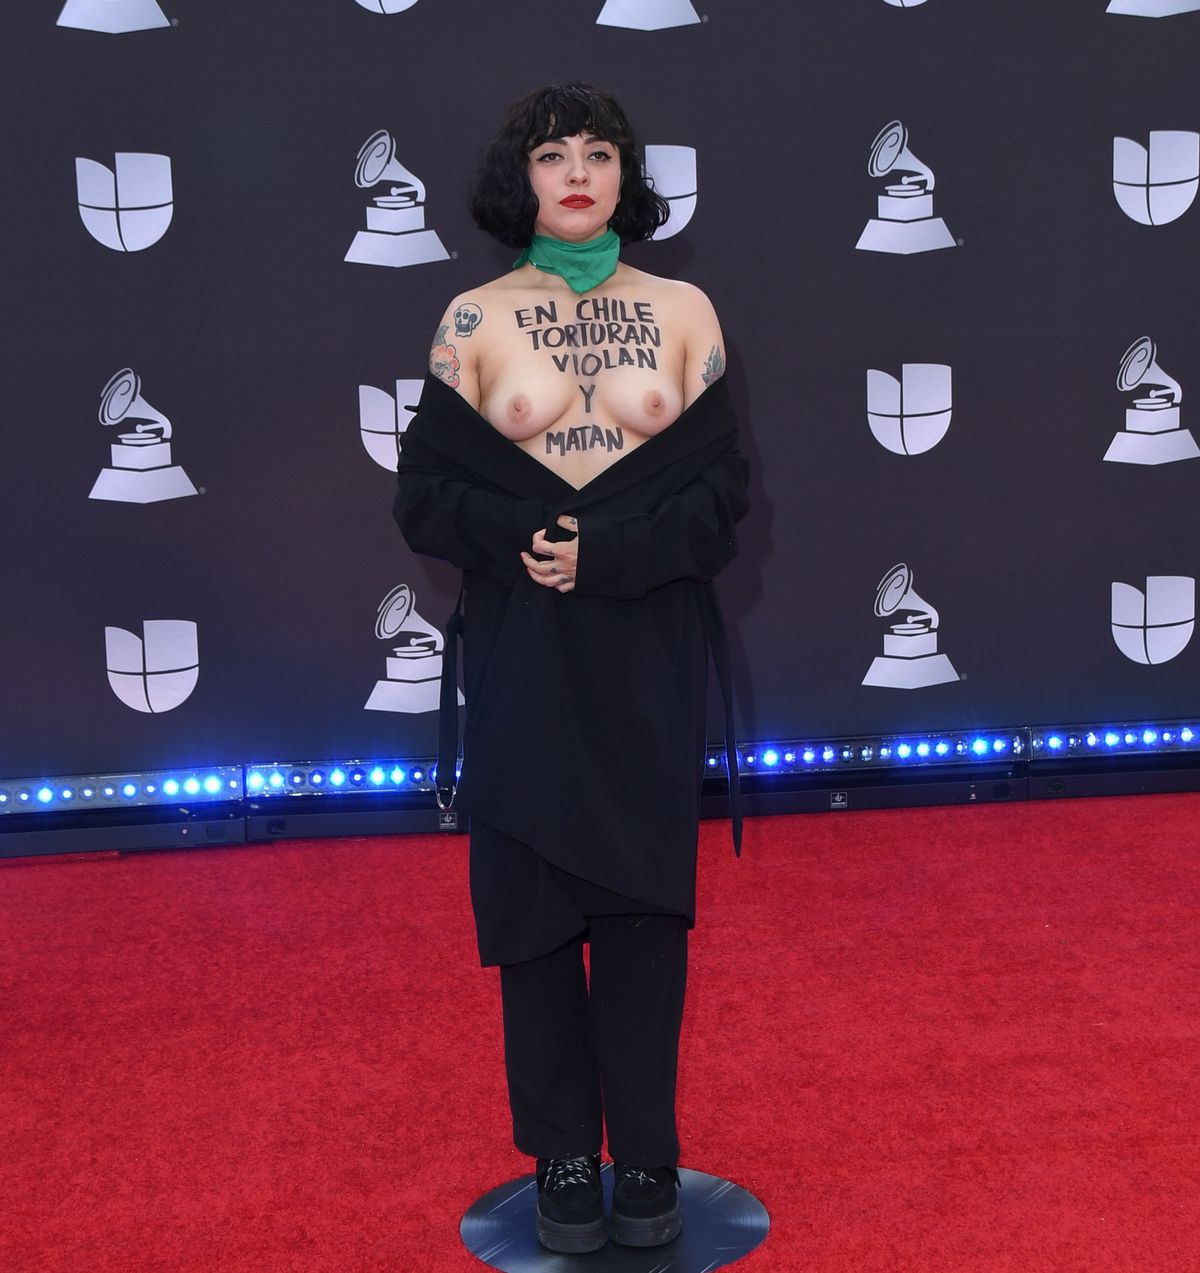 Mon Laferte staged a topless protest against the violence in Chile.